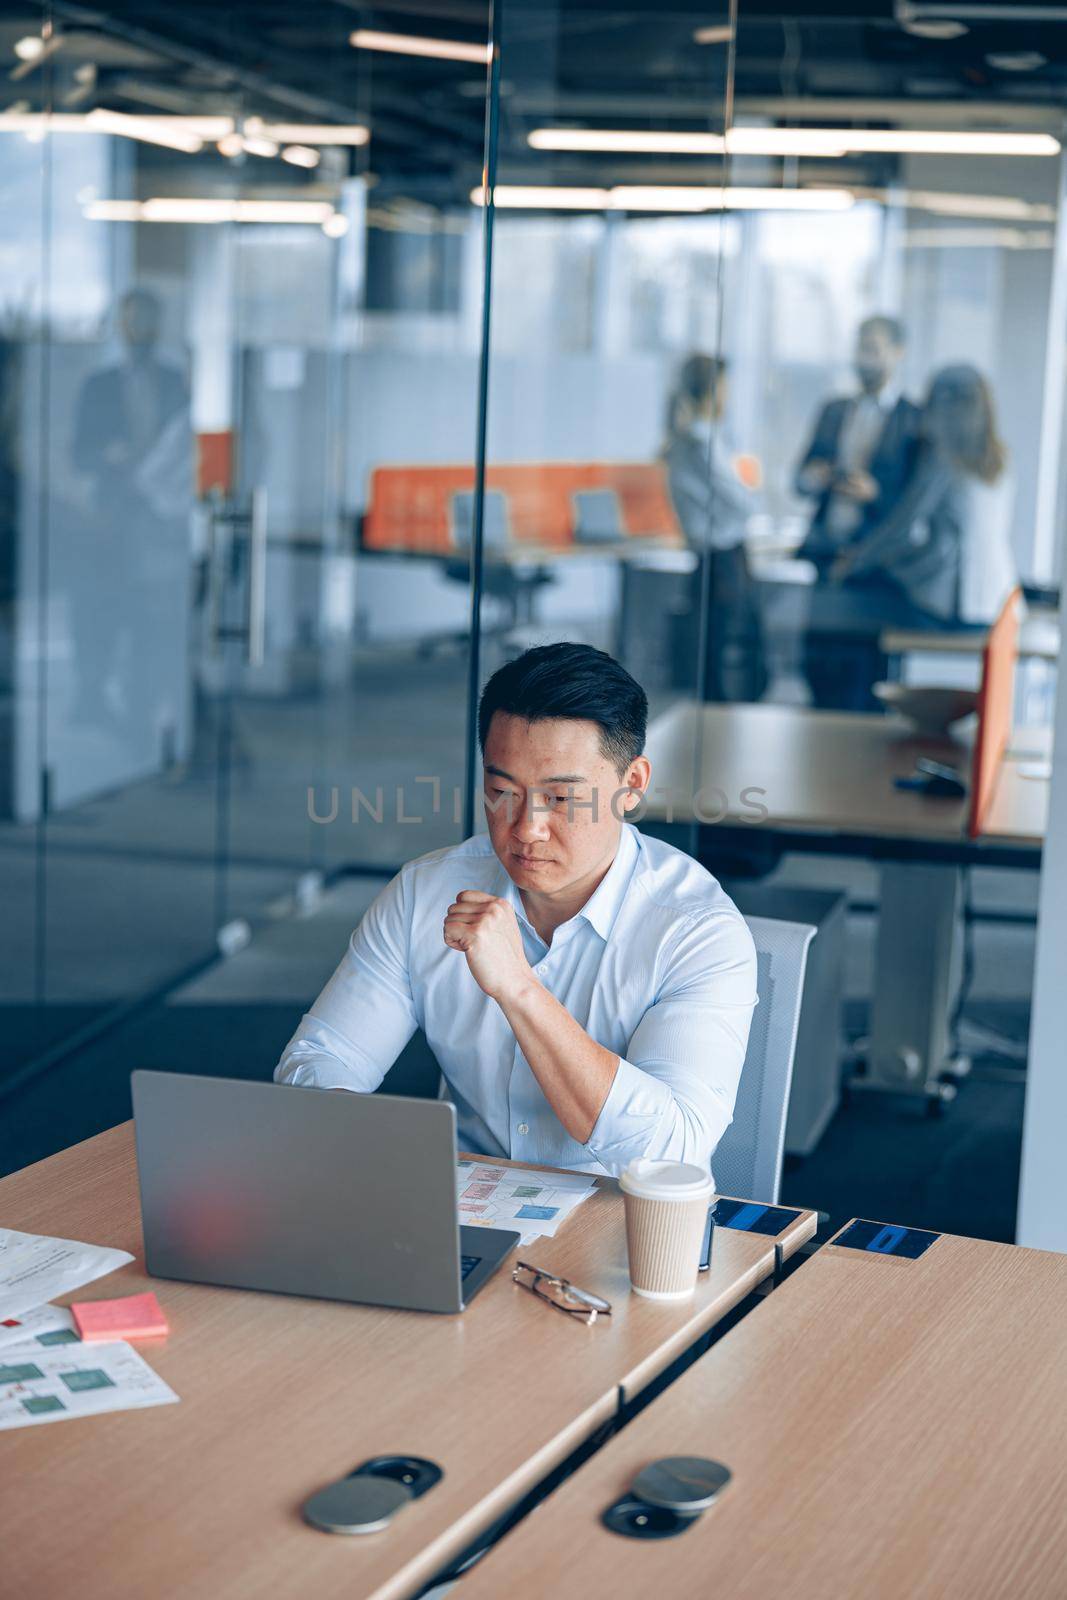 asian businessman working on laptop in office with colleagues in the background. Business concept